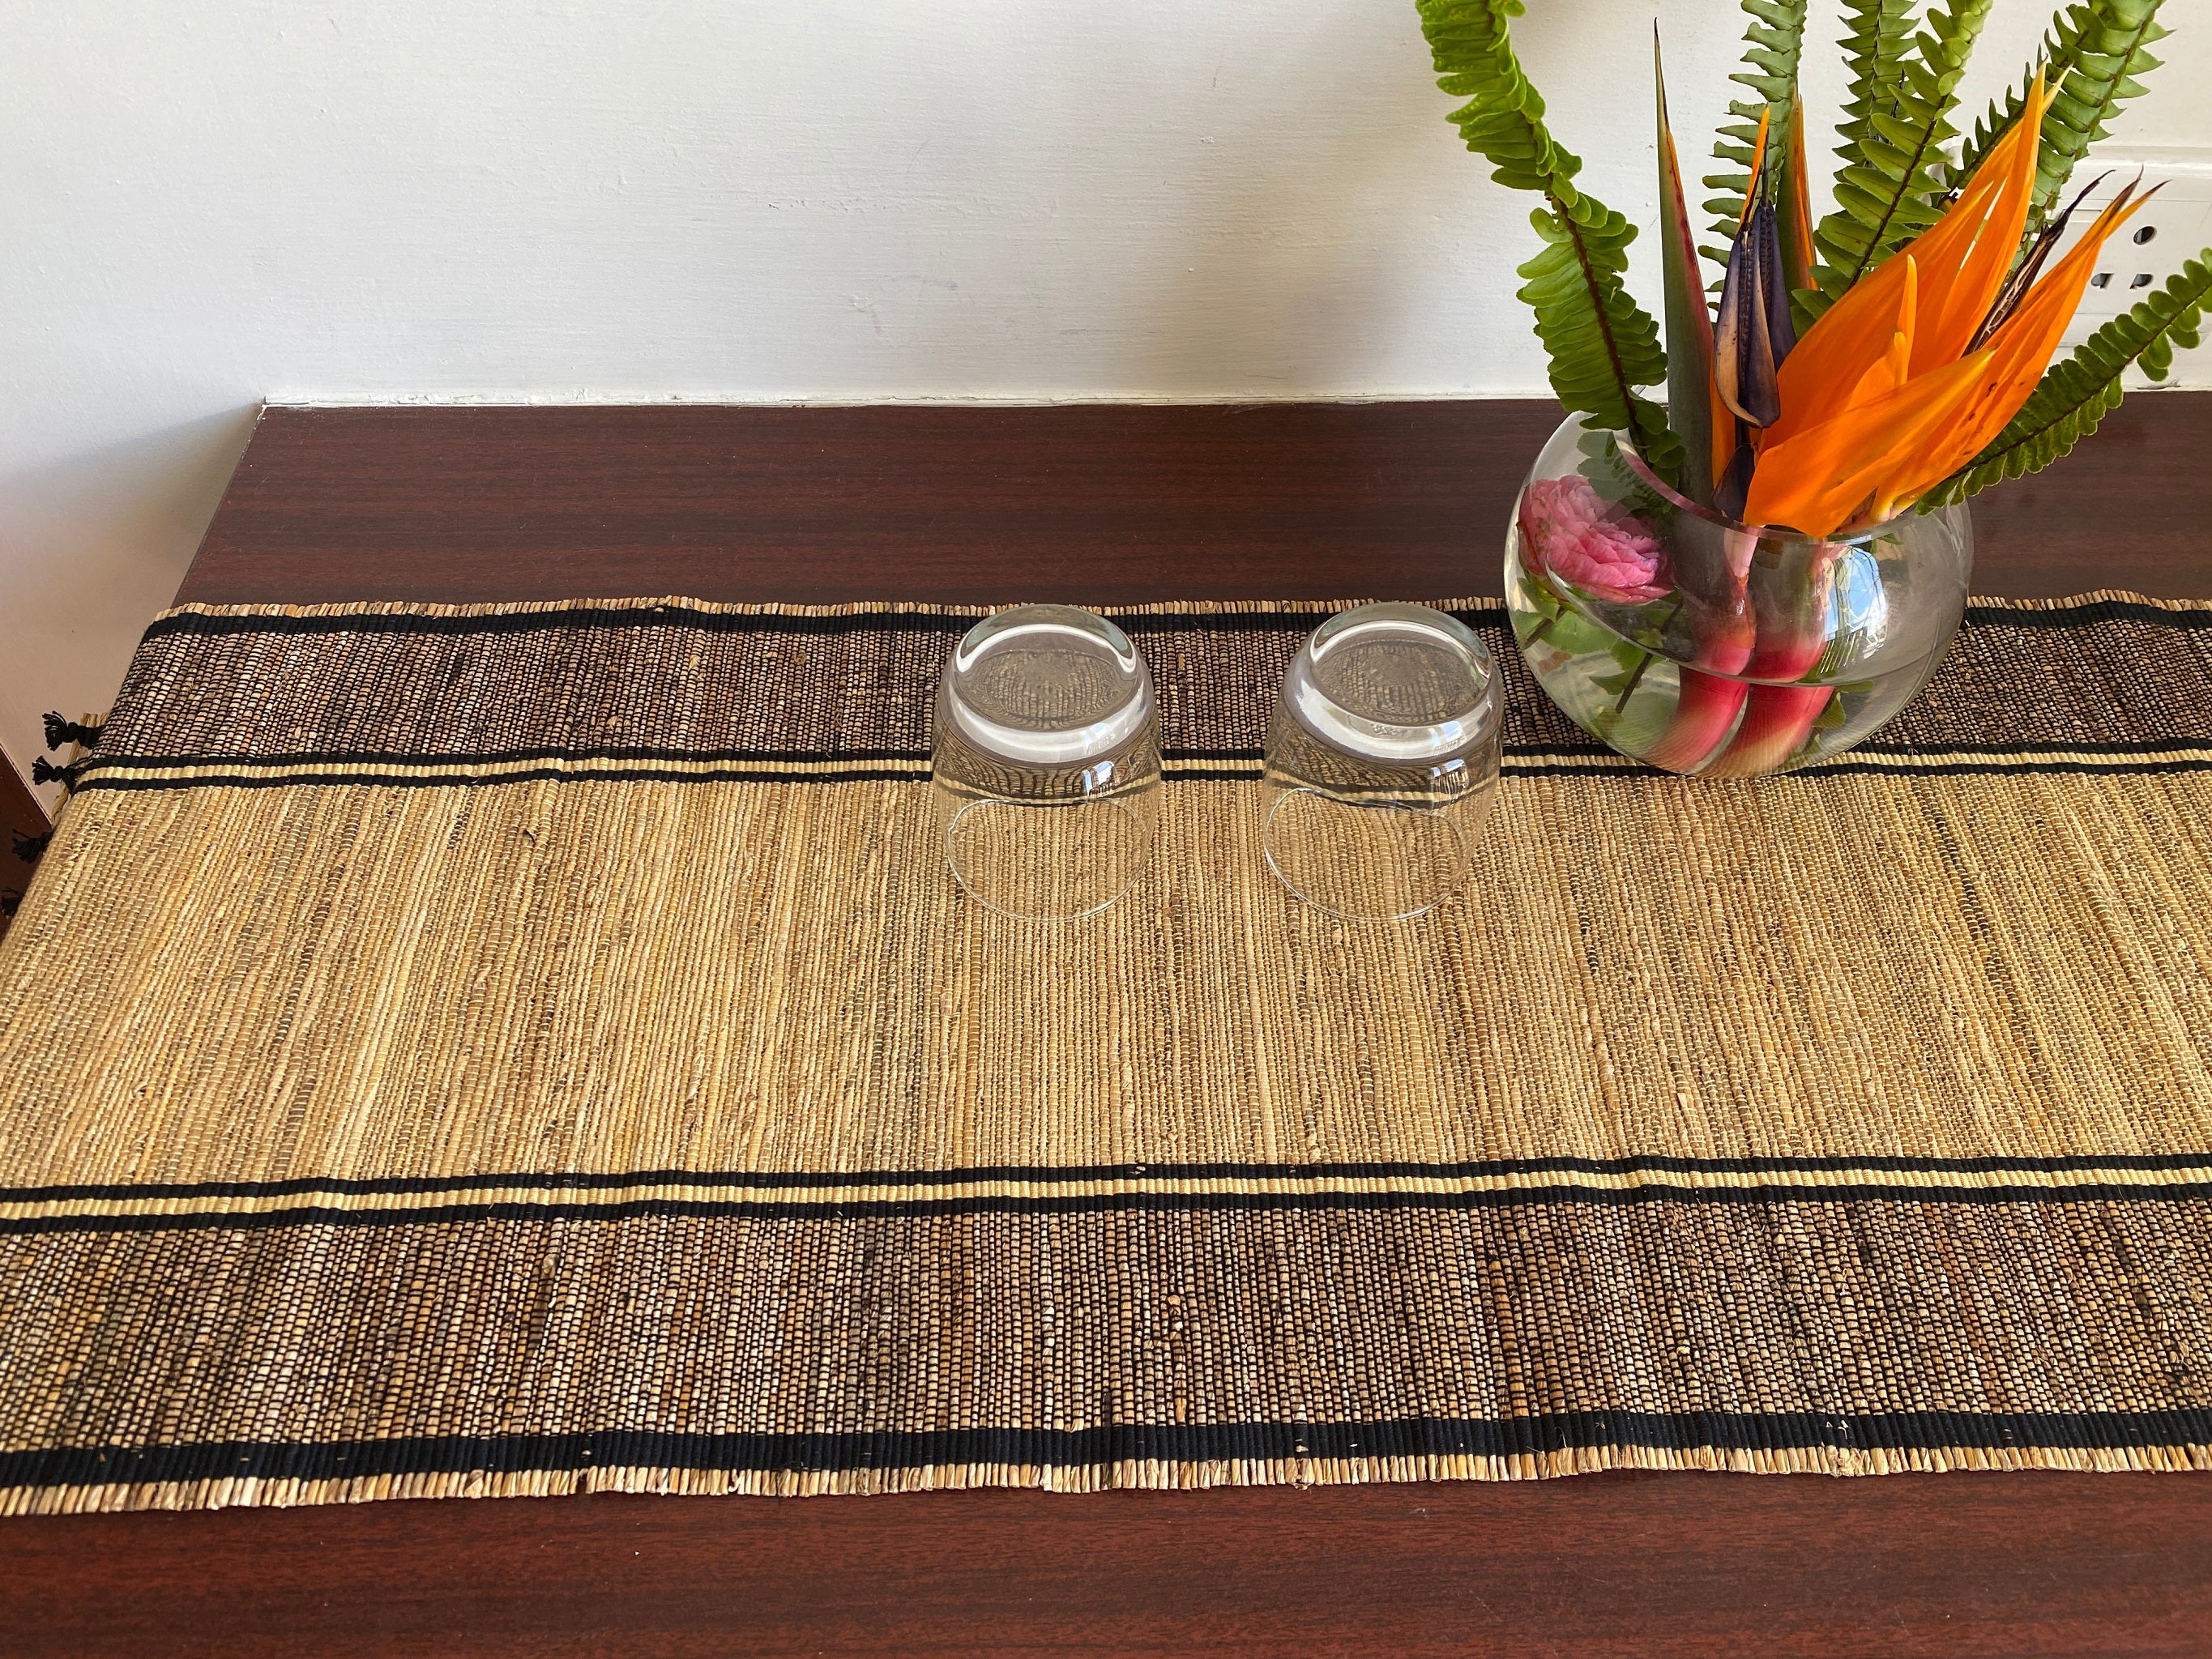 Natural Handmade River Grass Table Runner with 6 Dining Table Mats